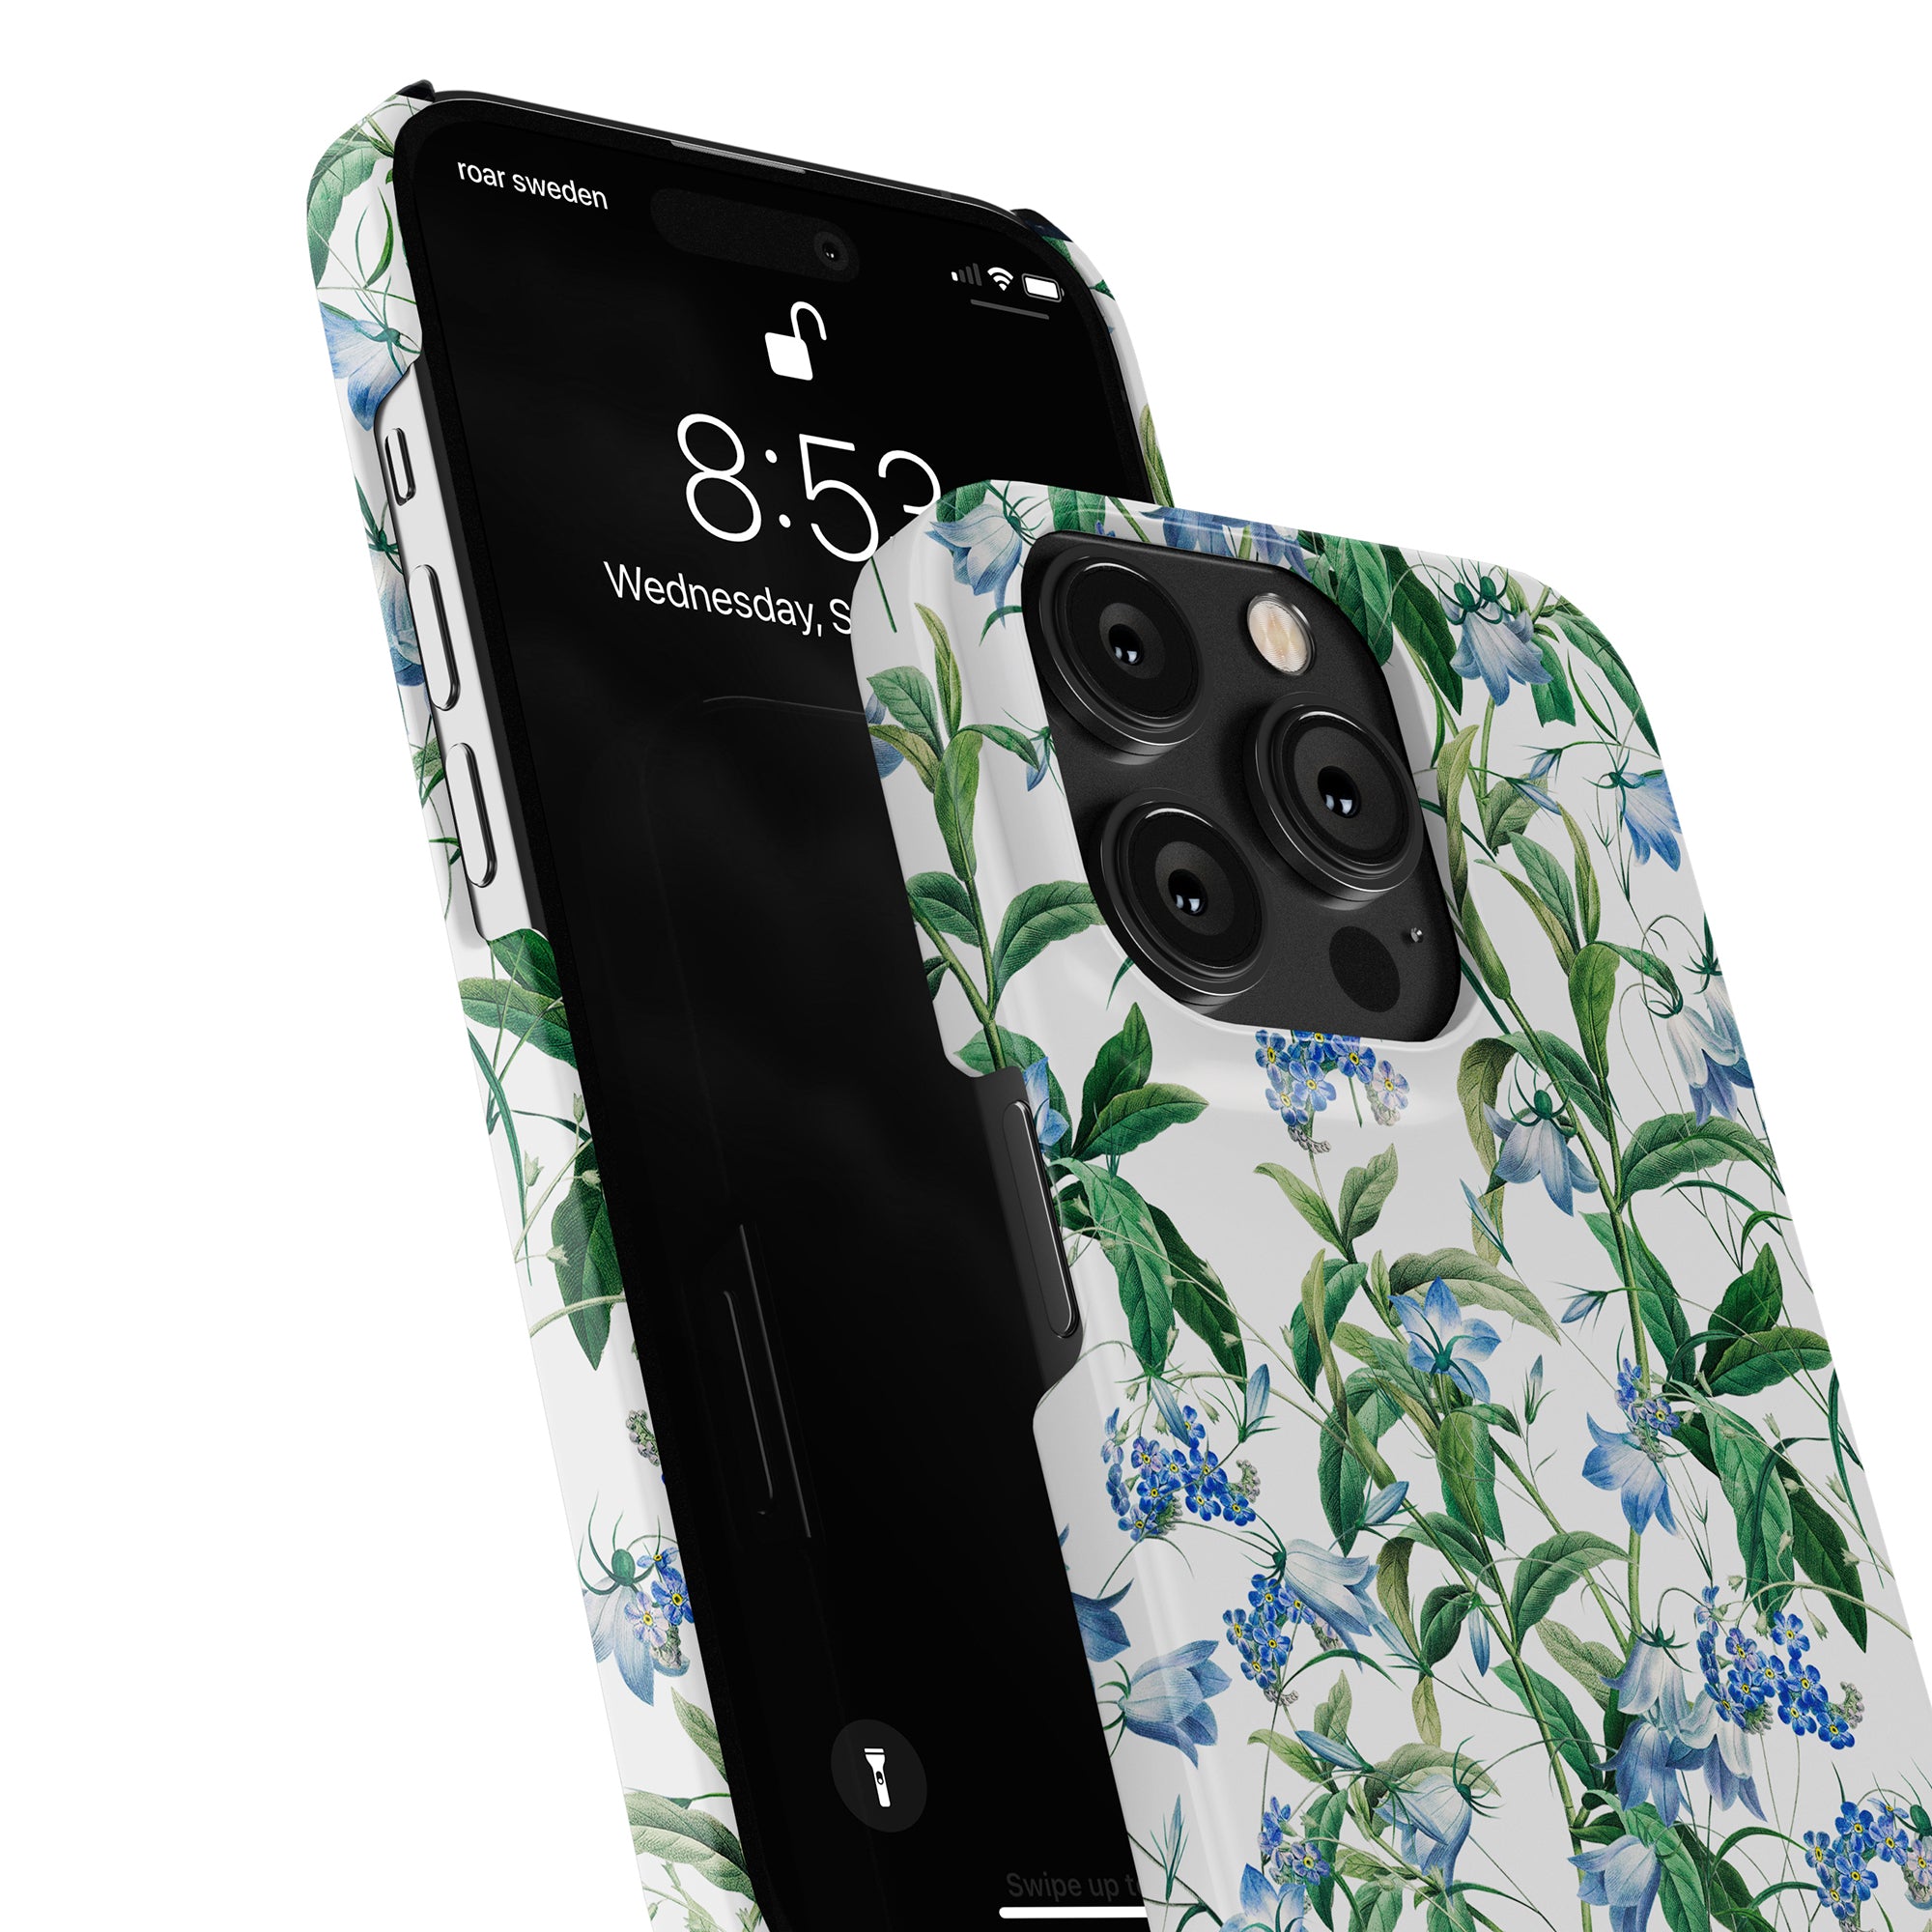 A smartphone with a Blue Bells - Slim case, featuring organic elements, is displayed from an angled perspective that shows both the front screen and rear camera design.